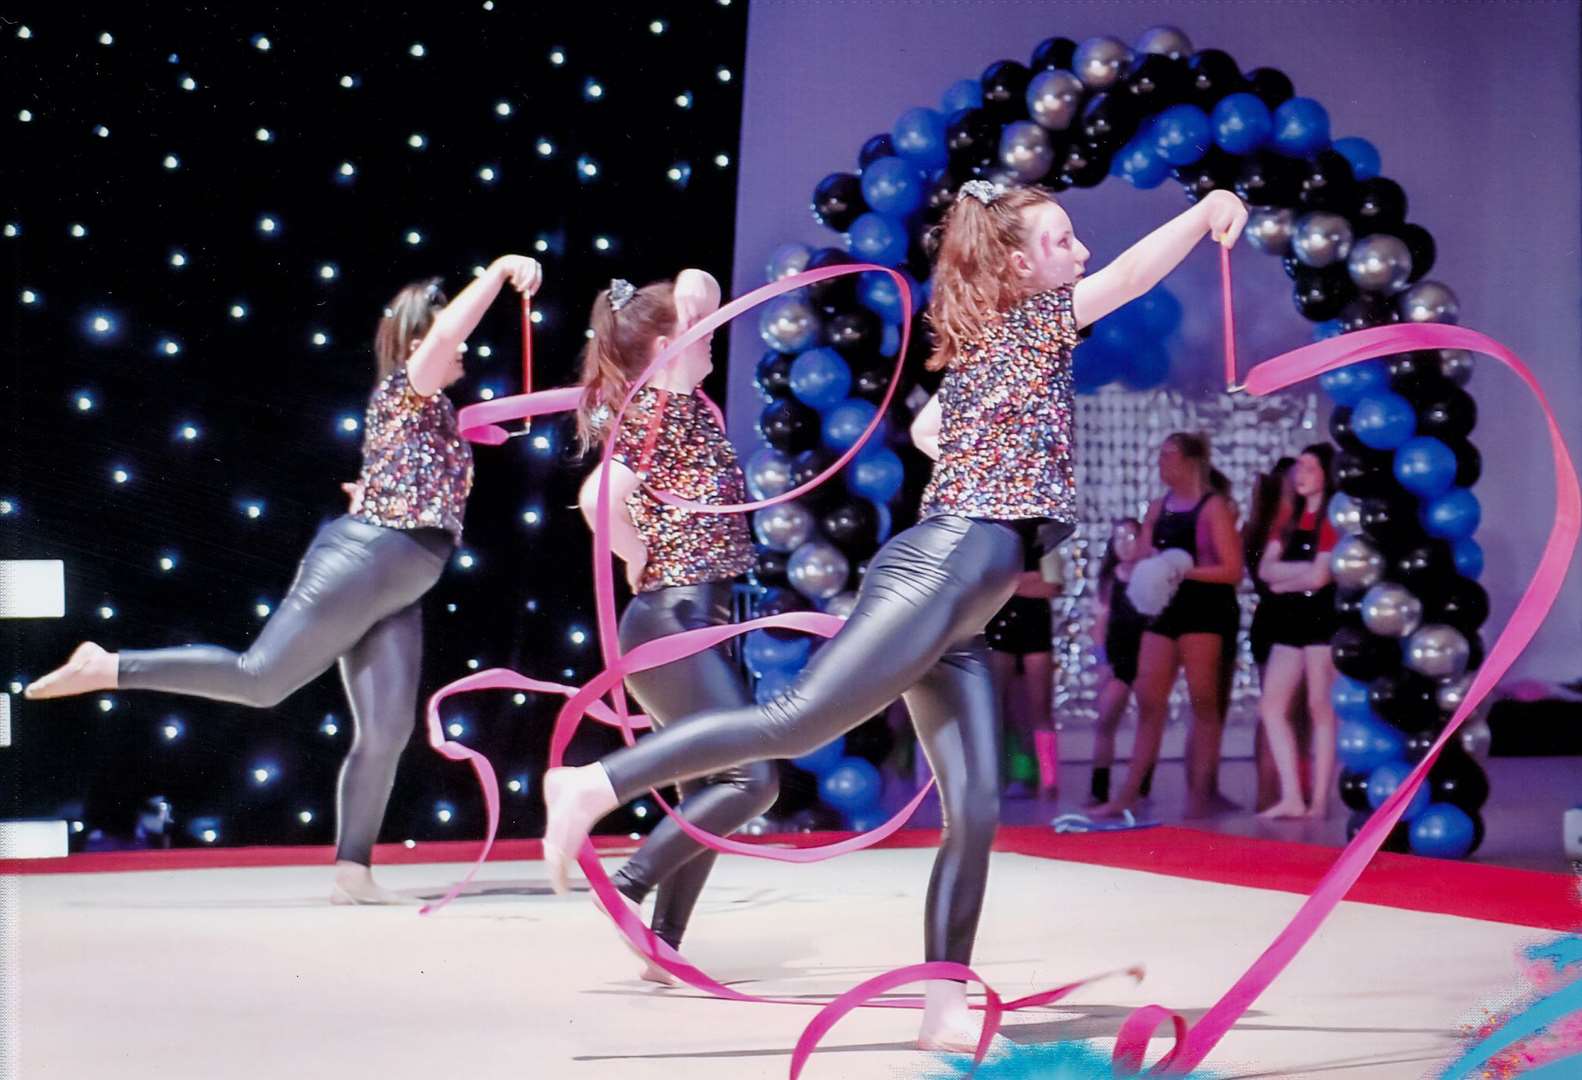 Members of Caithness Rhythmic Gymnastics performing at the event in Paisley. Picture: Taken Photography